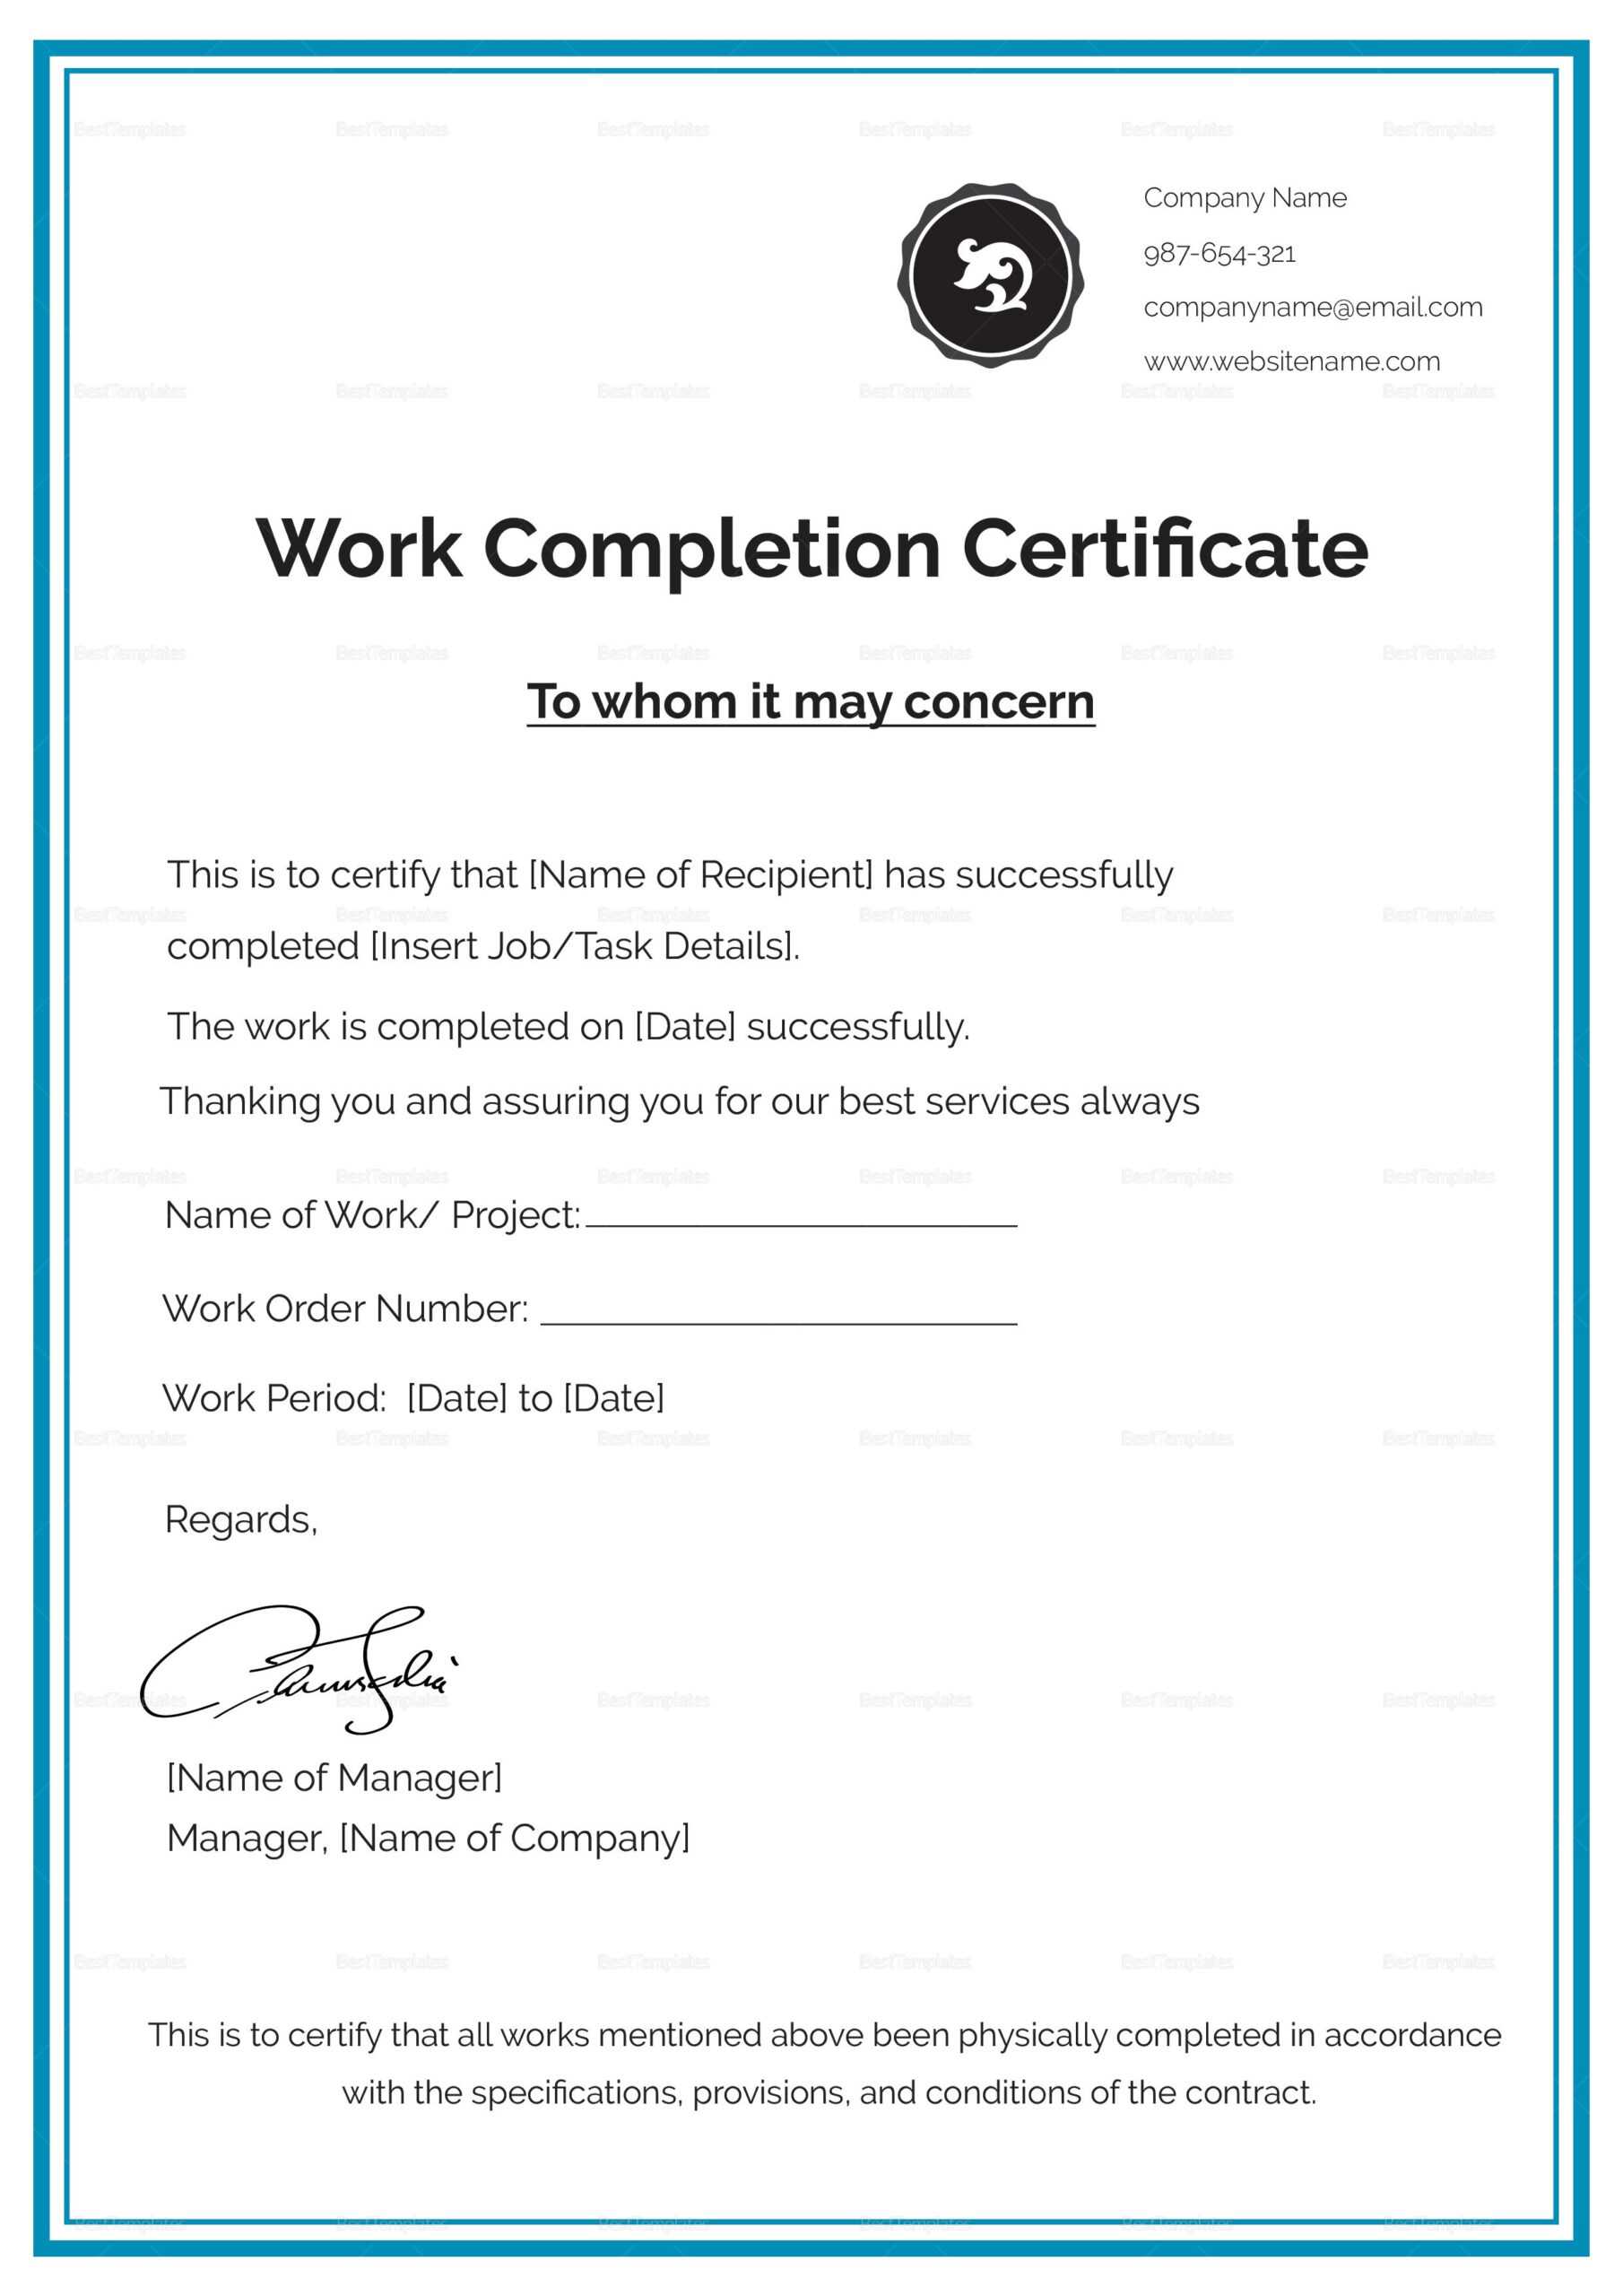 Pinadil Khan On Job In 2019 | Certificate Templates Regarding Certificate Template For Project Completion